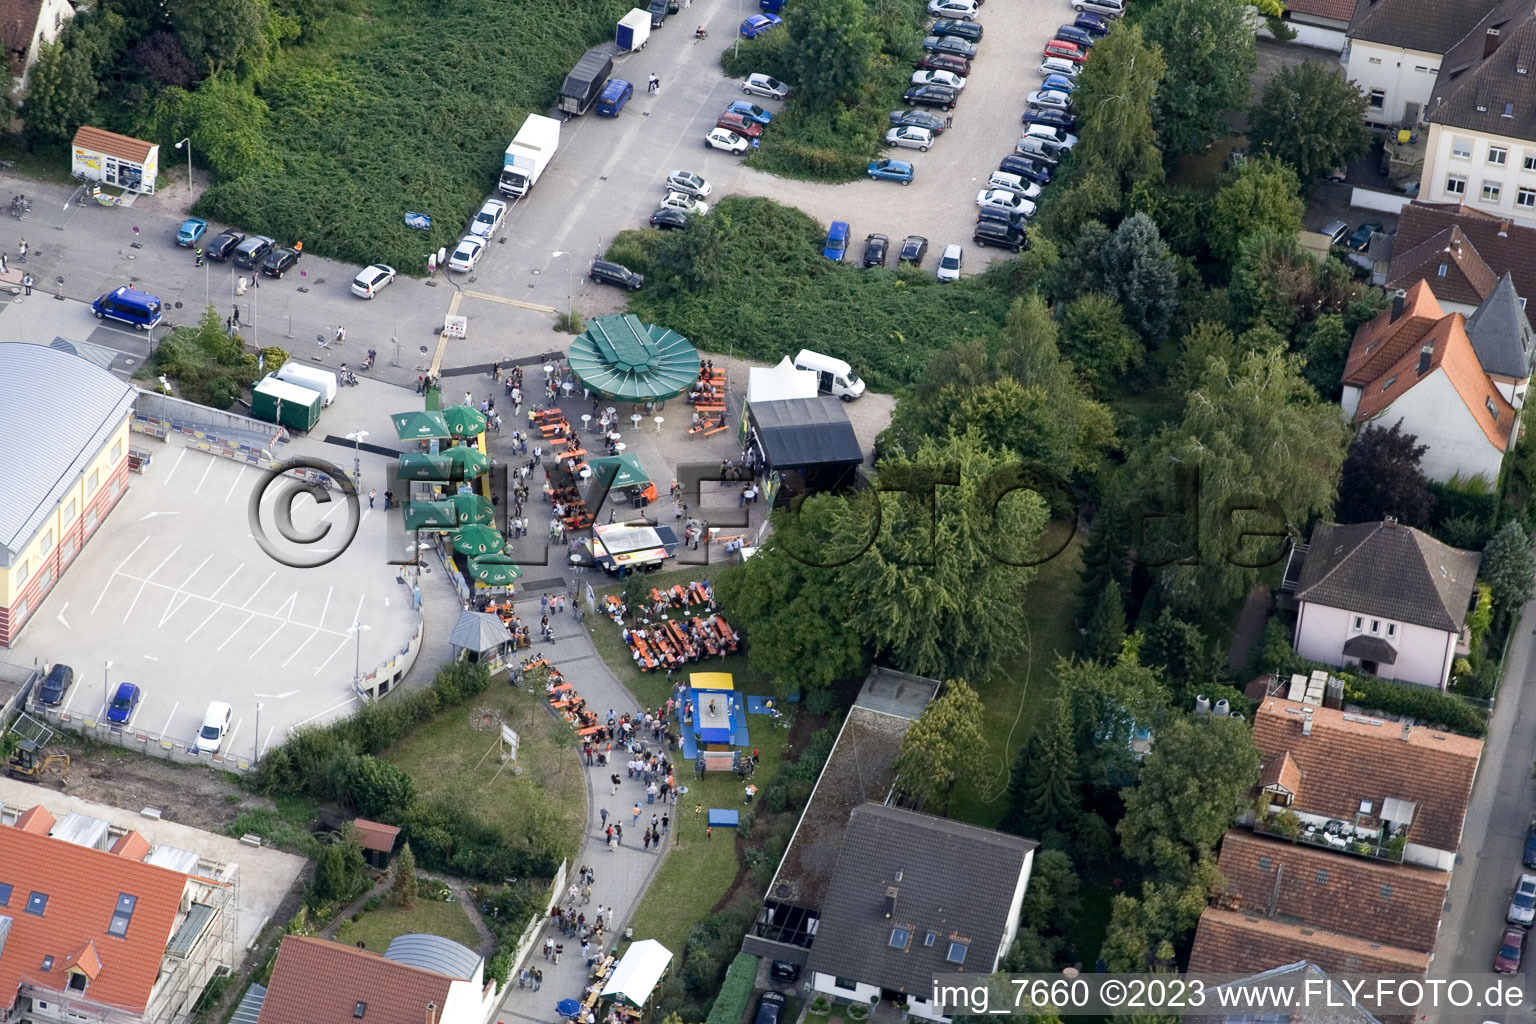 Aerial photograpy of City festival, community square in Kandel in the state Rhineland-Palatinate, Germany